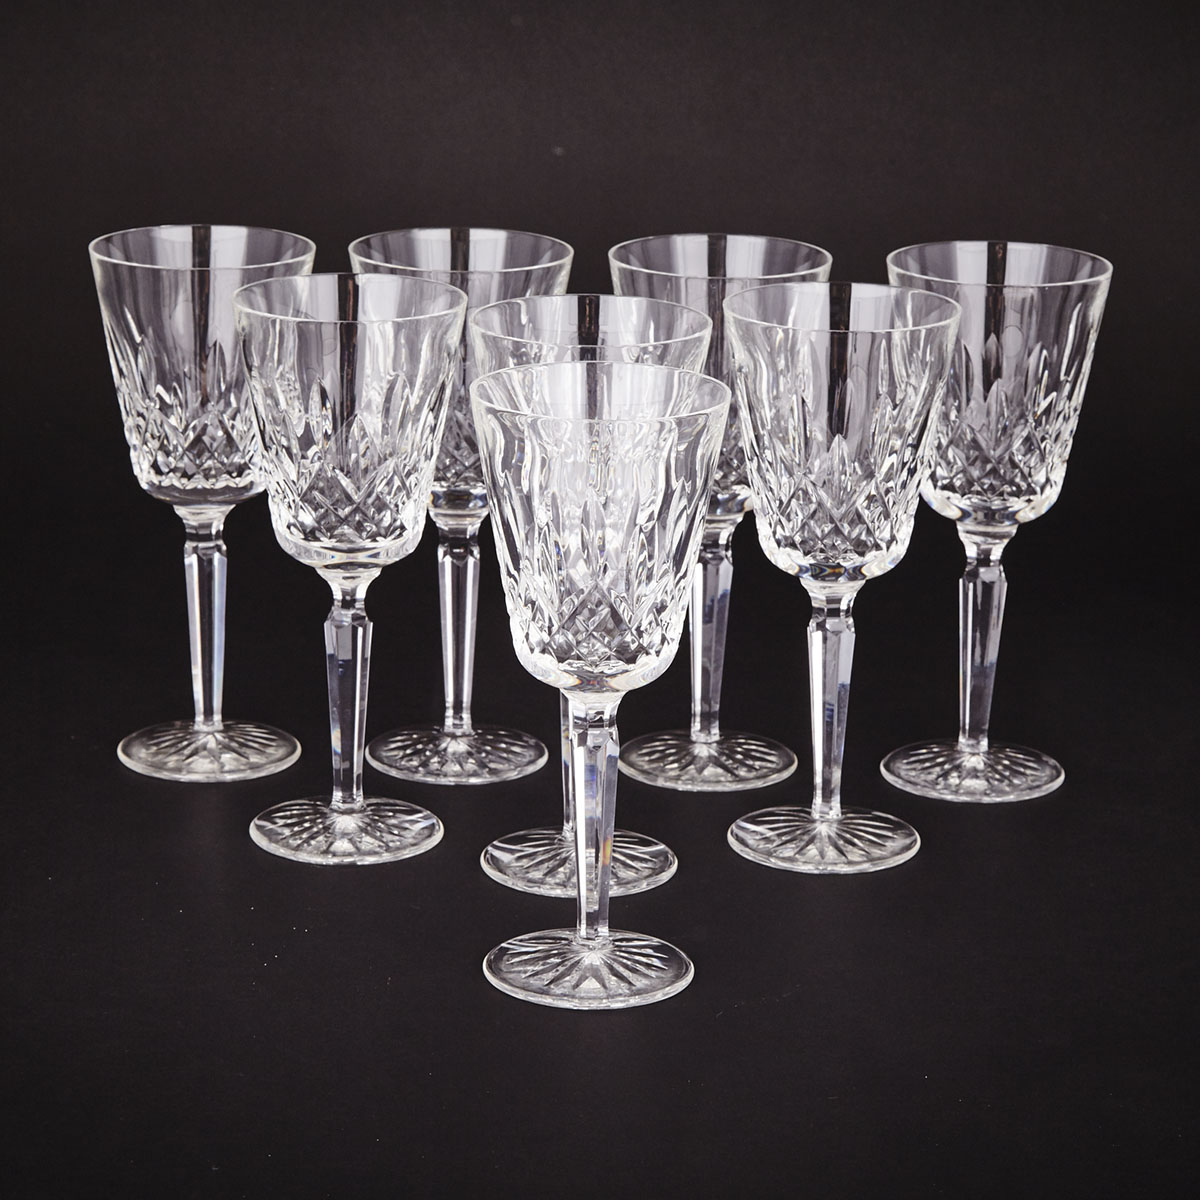 Eight Waterford ‘Lismore’ Pattern Cut Glass Wine Goblets, 20th century